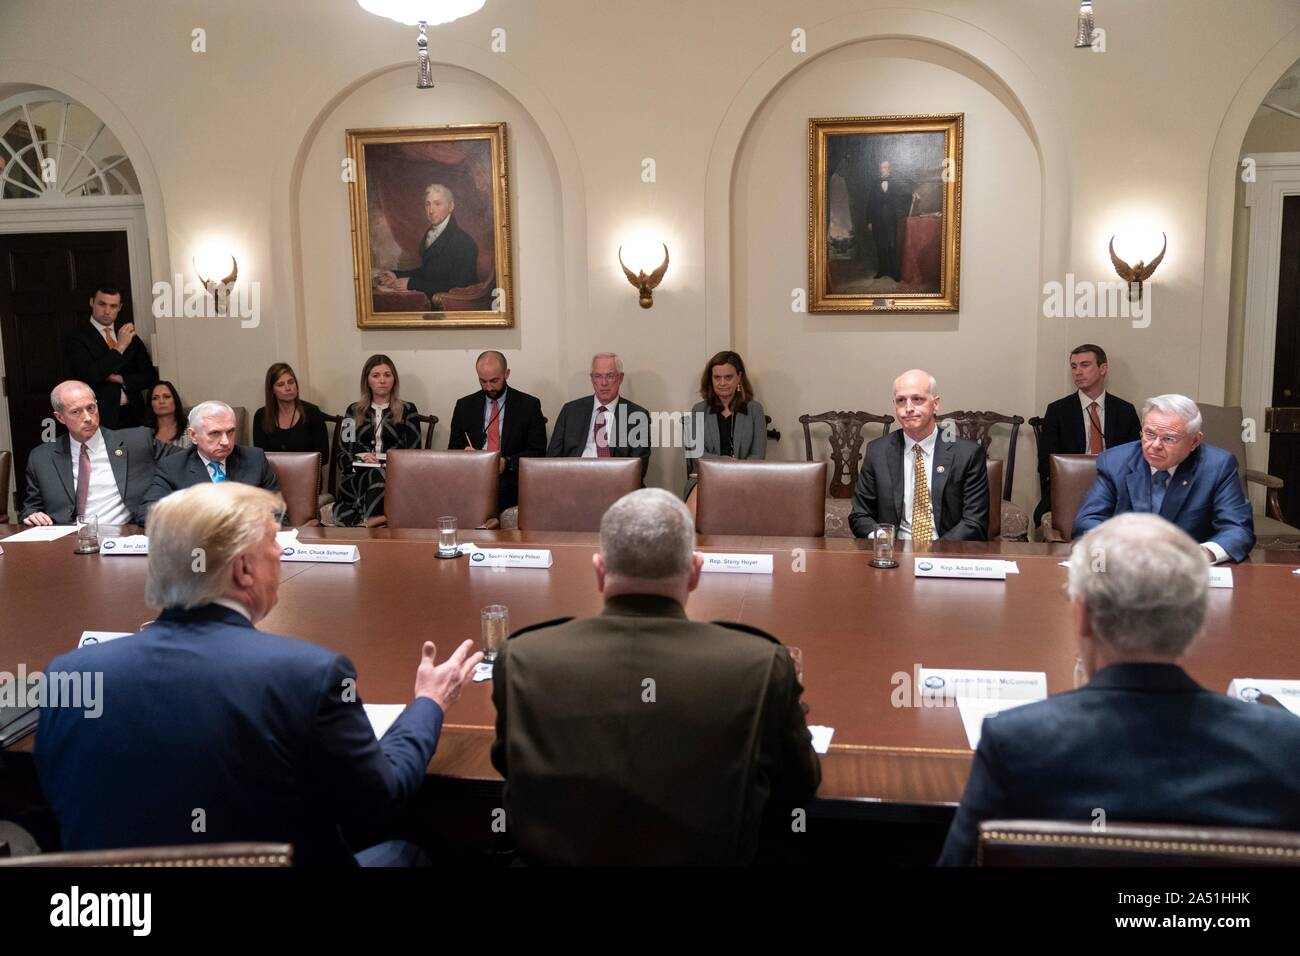 Washington, United States of America. 16 October, 2019. U.S President Donald Trump continues to hold a meeting on the crisis along the Turkish border after the Congressional Democratic leadership walked out in the Cabinet Room of the White House October 16, 2019 in Washington, DC. The meeting called by the president to discuss the crisis along the Syrian - Turkey border devolved into a confrontation before Speaker Nancy Pelosi and democrats walked out.   Credit: Shealah Craighead/White House Photo/Alamy Live News Stock Photo